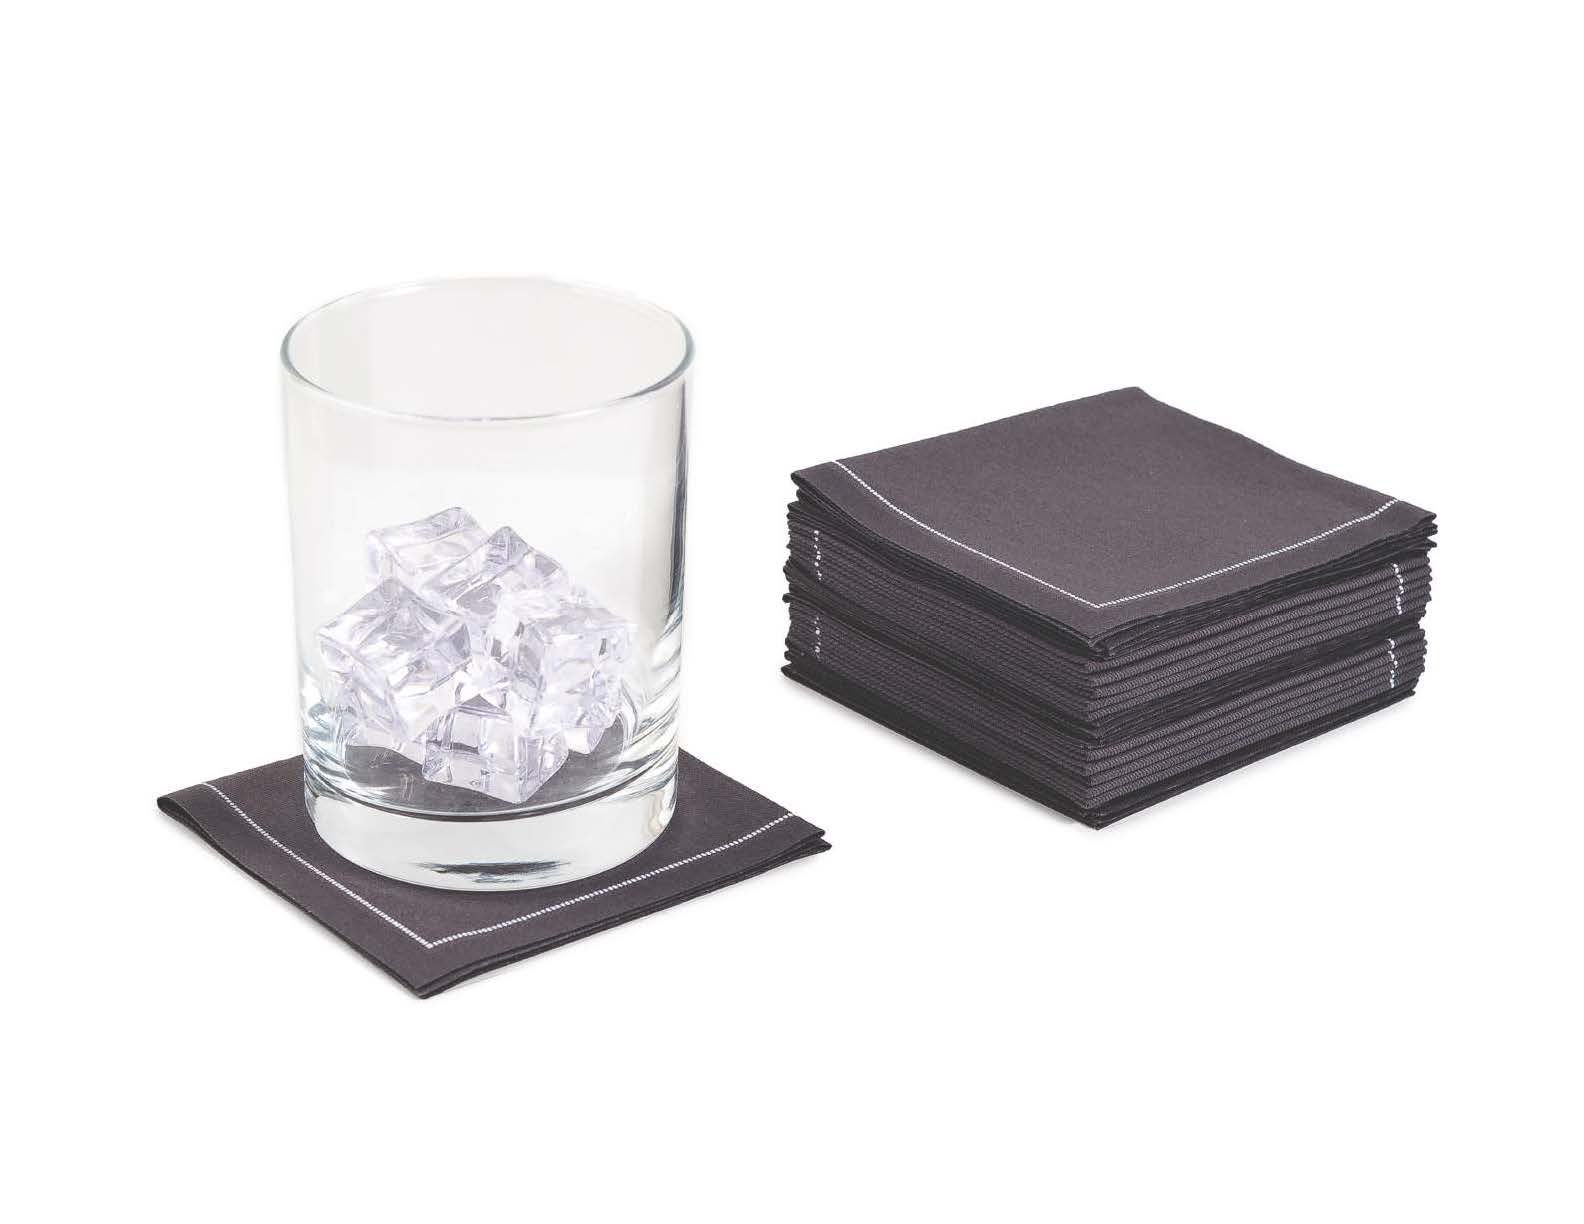 Anthracite Grey 1/4 Fold Cocktail - 100% Organic Cotton (180 GSM) - 8" x 8" (folded 4" x 4") - 600 units